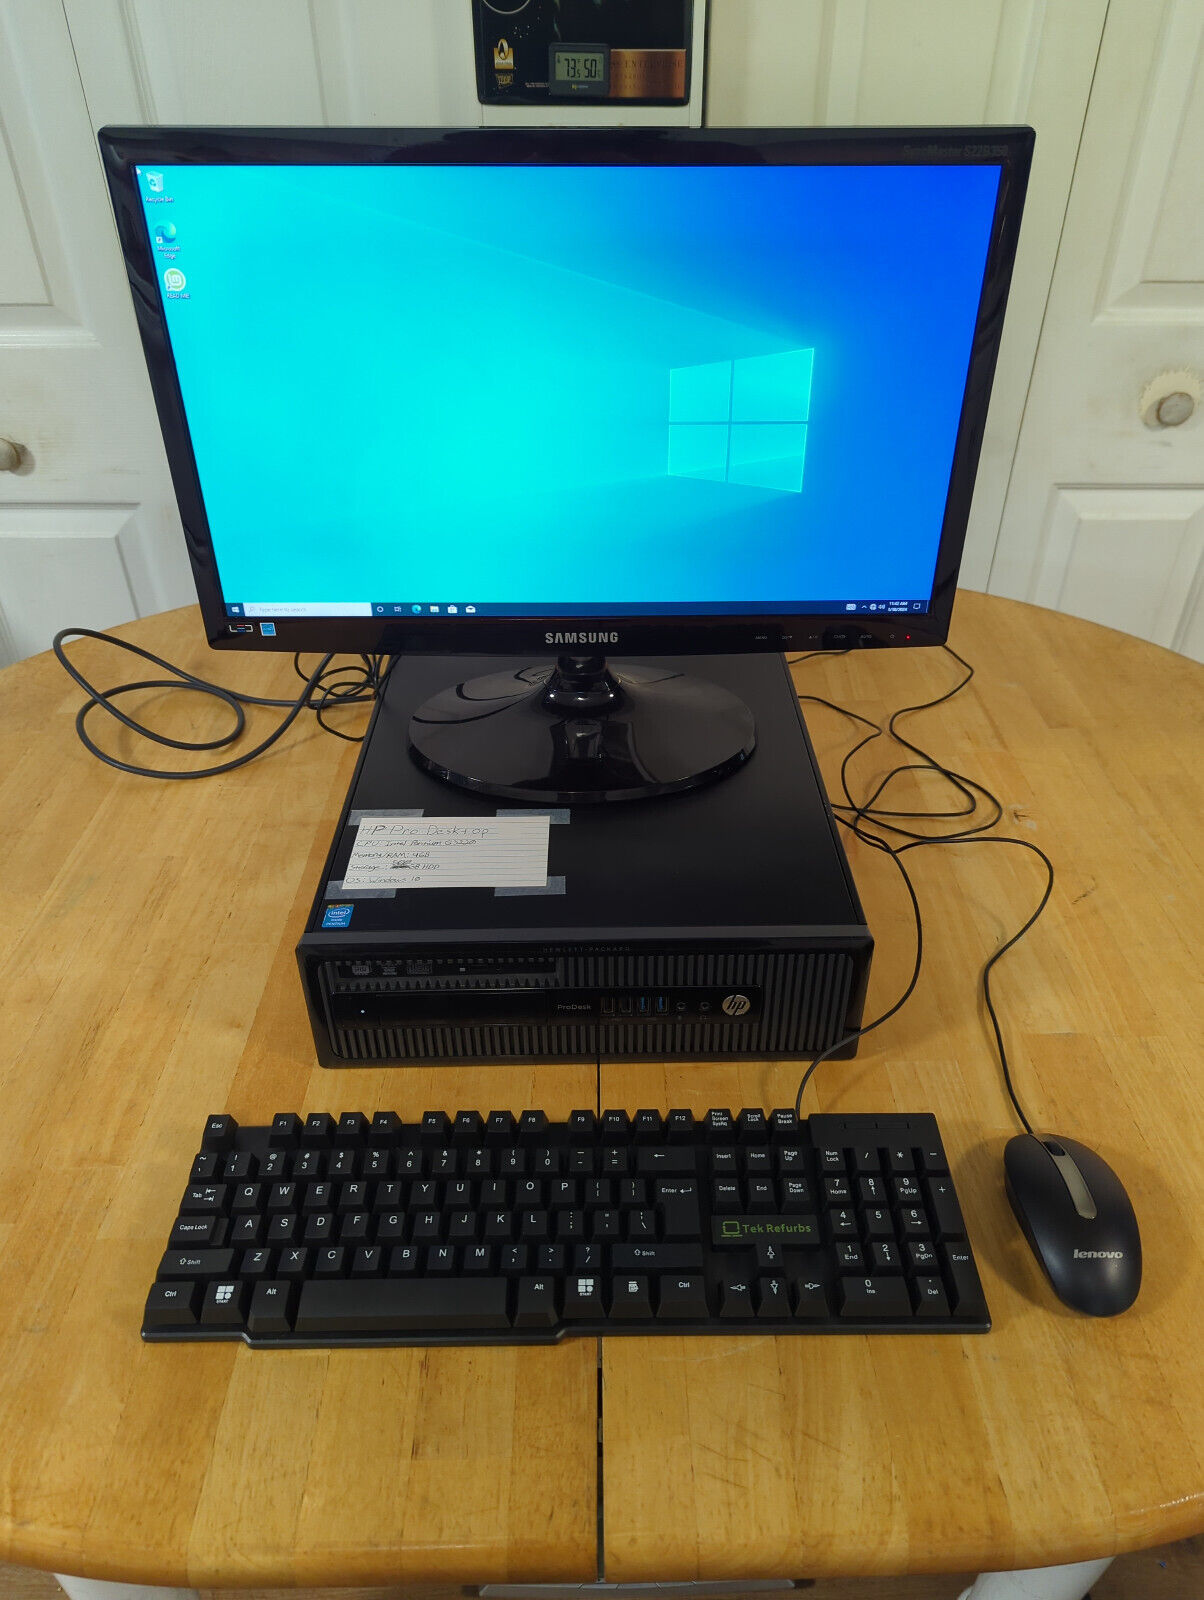 HP ProDesk 600 G1 SFF - Comes with wires, keyboard, & mouse (Monitor demo only)